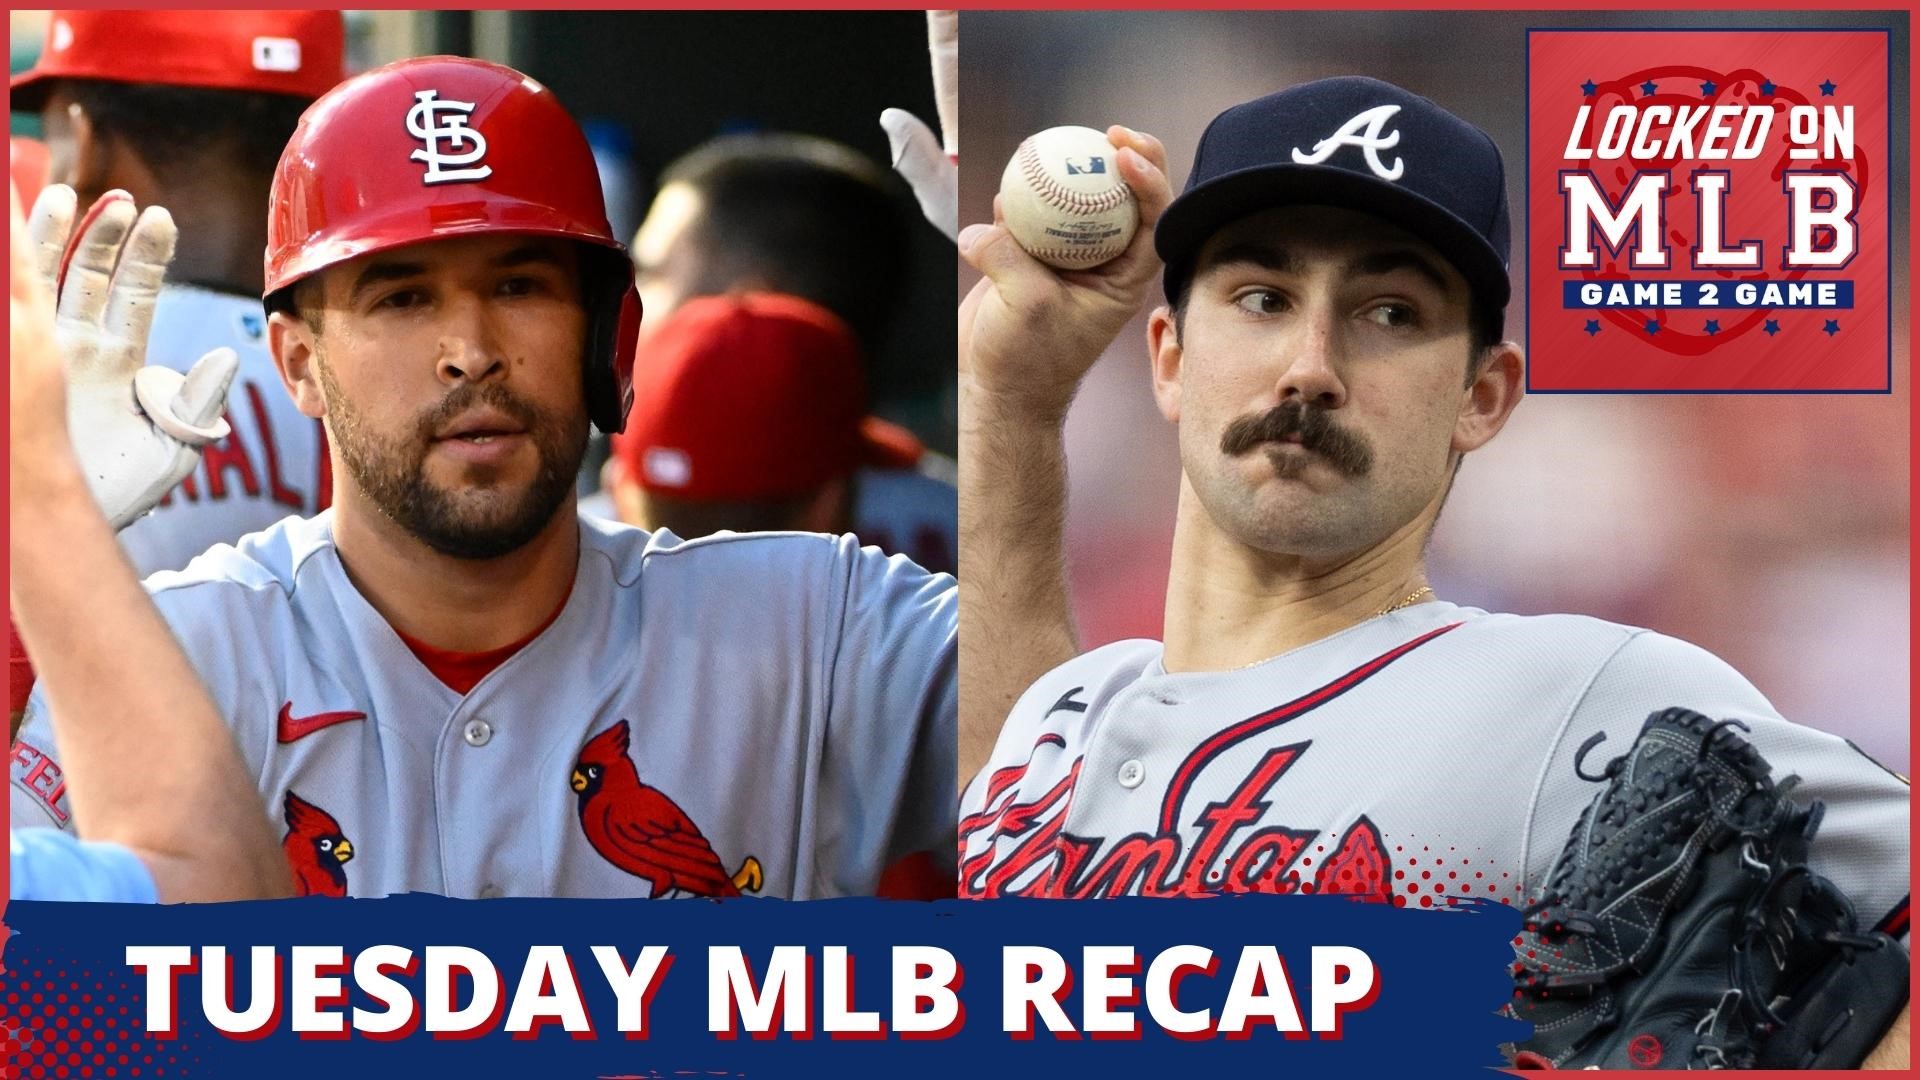 The latest in the MLB from the Braves winning a battle against the Phillies to the Orioles beating the Rays.